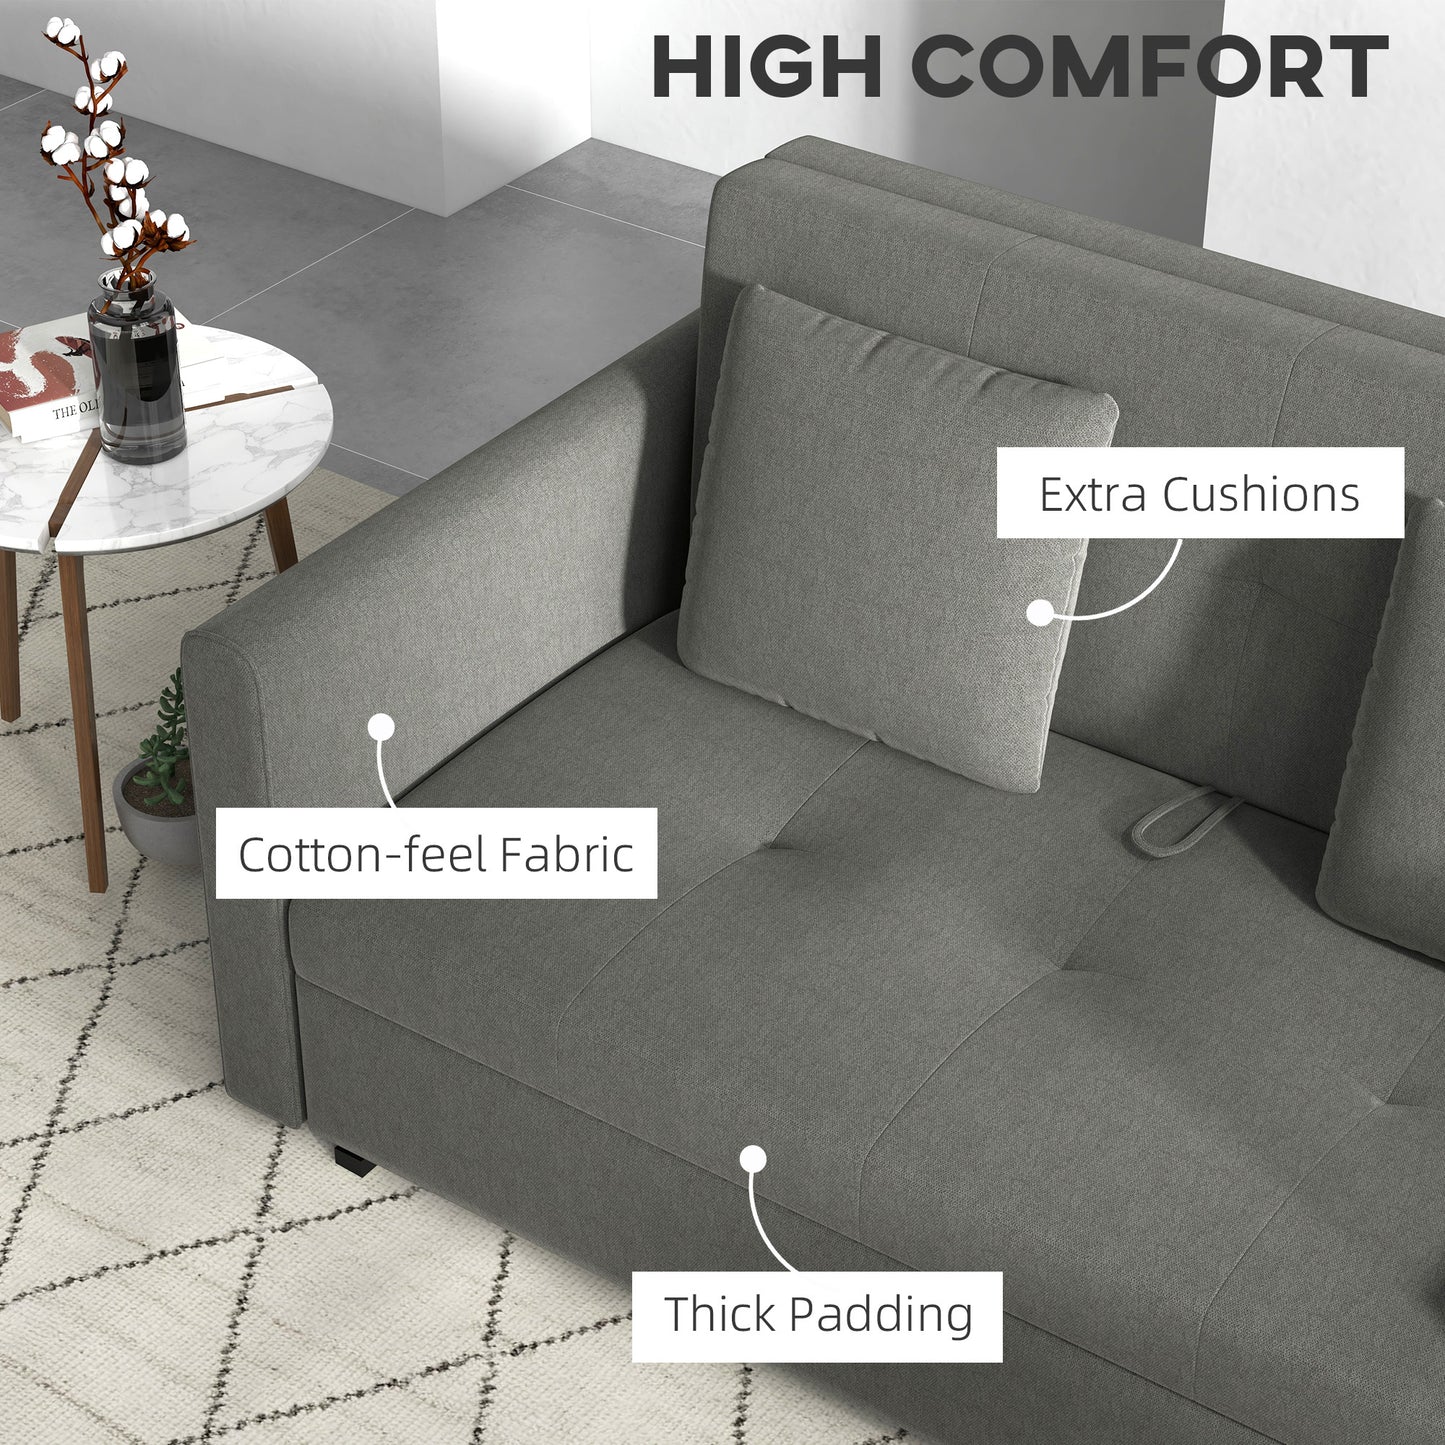 HOMCOM 2 Seater Sofa Bed, Convertible Bed Settee, Modern Fabric Loveseat Sofa Couch w/ Cushions, Hidden Storage for Guest Room, Light Grey